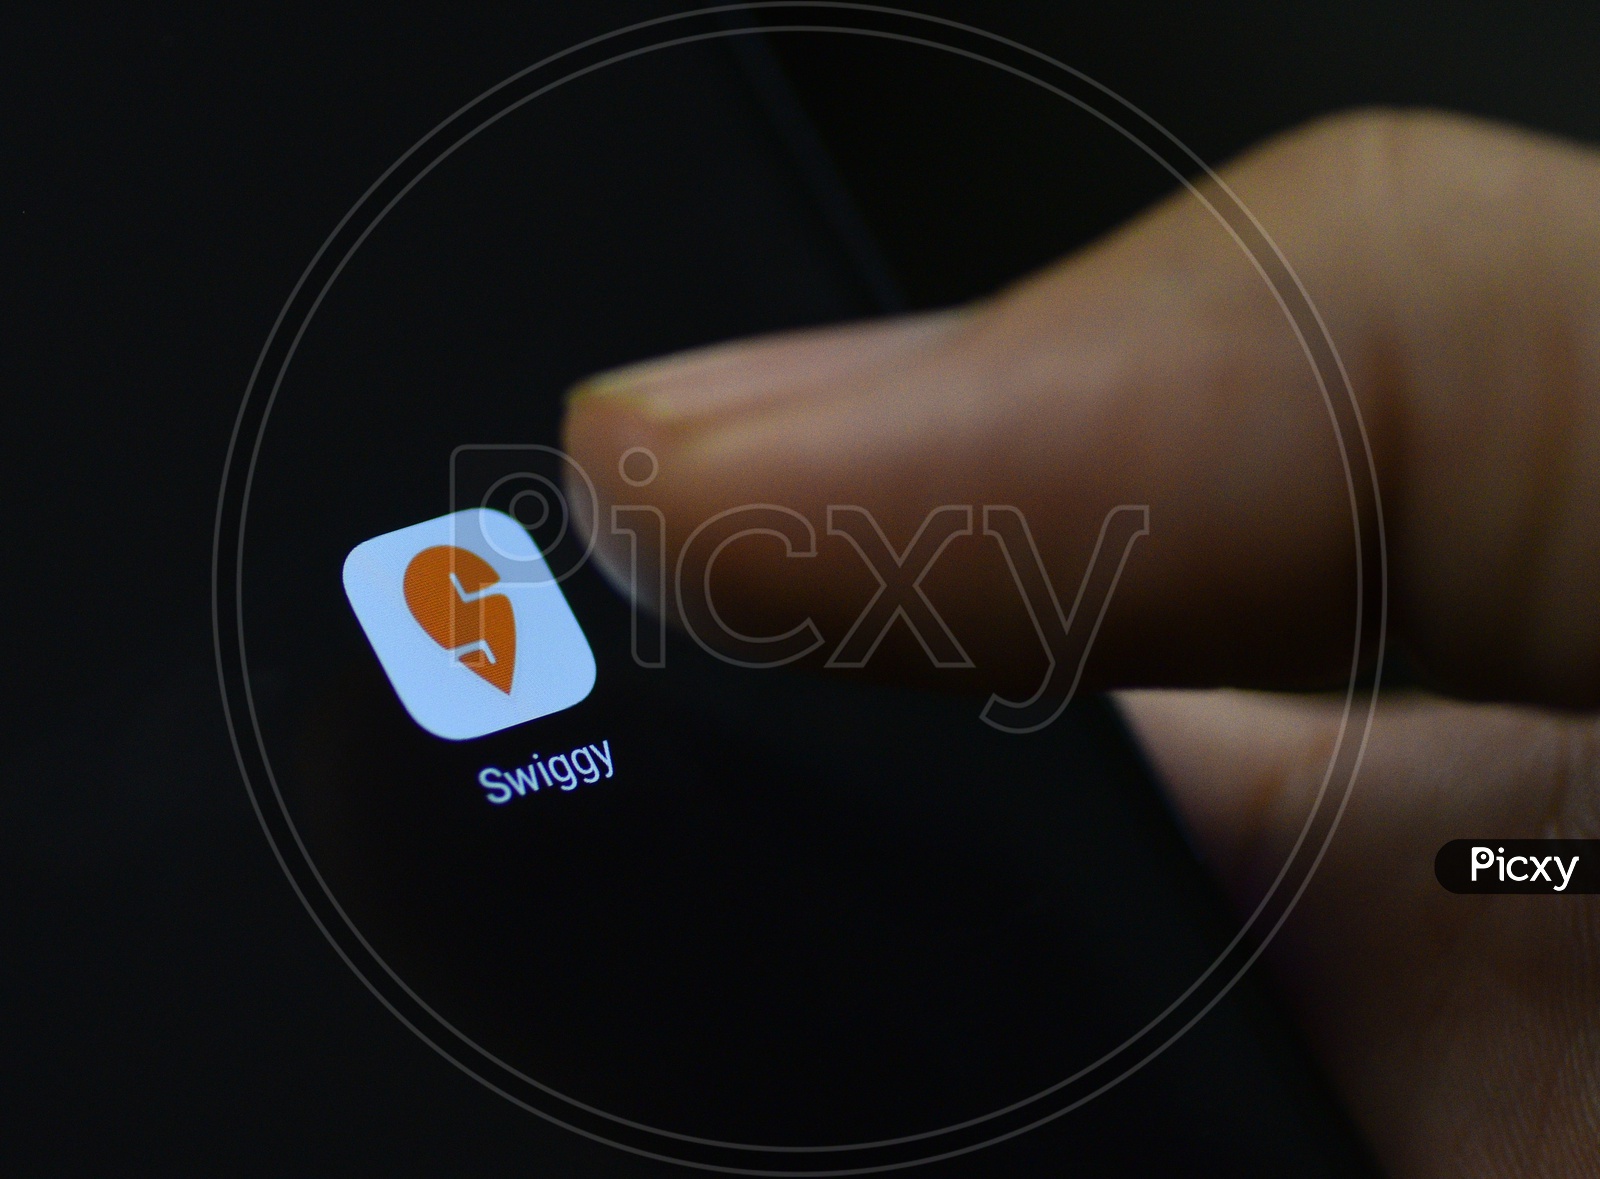 Swiggy Online Food Delivery  Mobile App Icon Opening on Smartphone Screen  Closeup With Finger